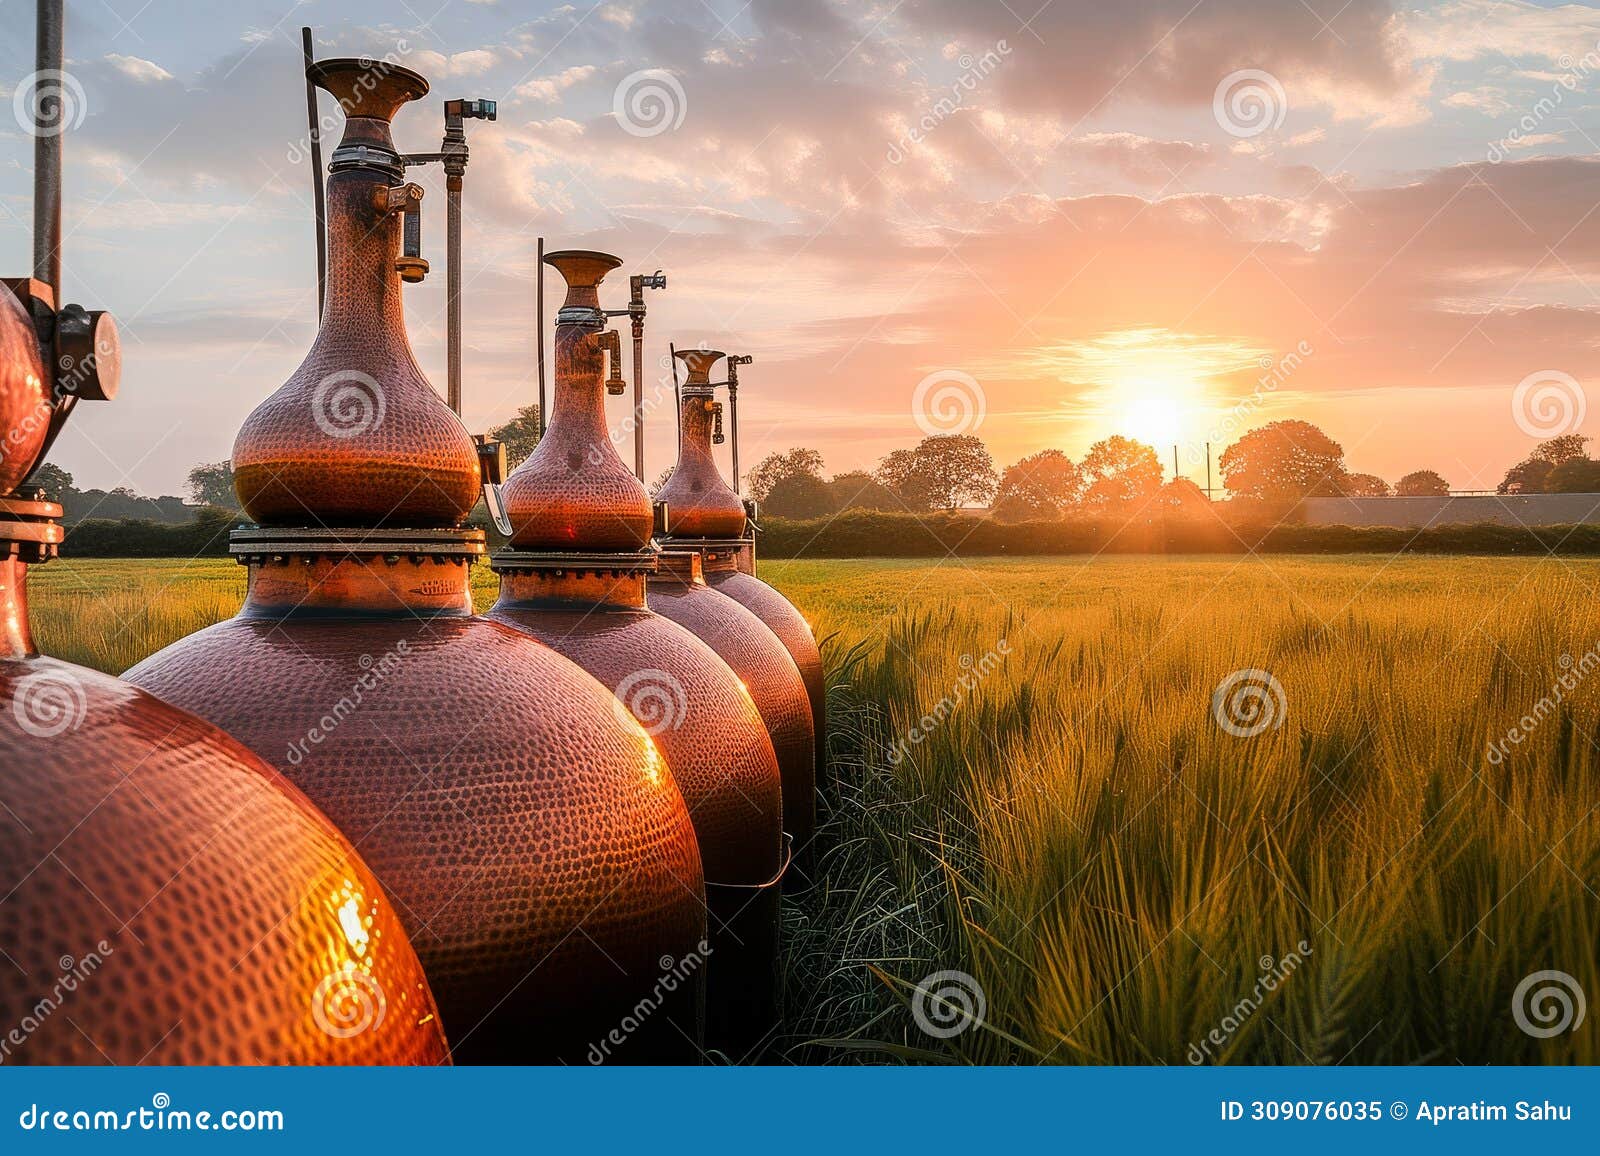 a golden sunset is casting a warm glow on distillery stills in a countryside field.